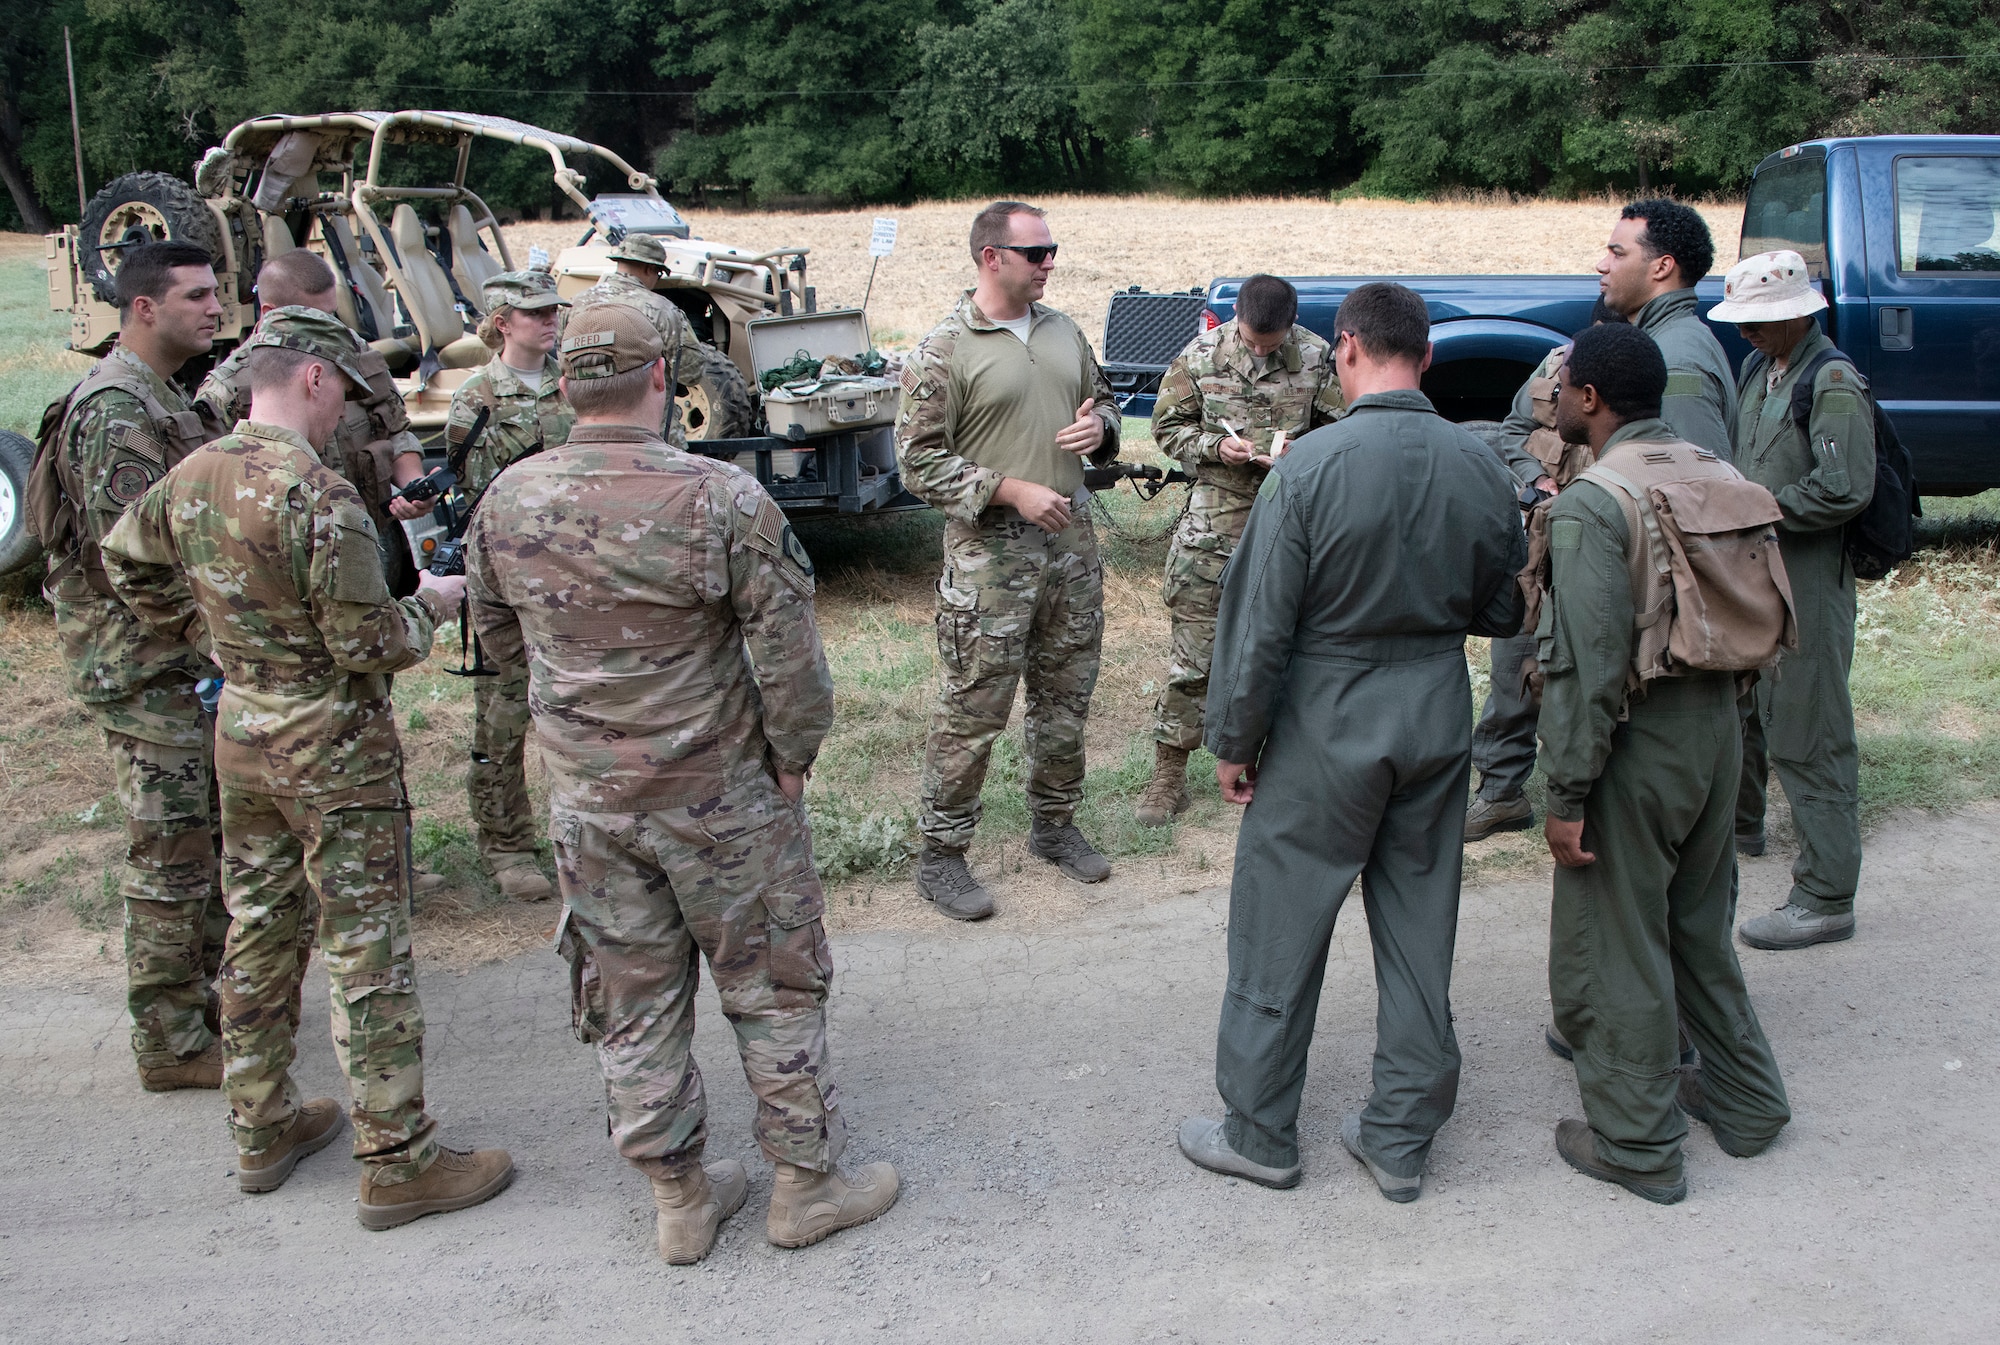 U.S. Air Force Tech. Sgt. Benjamin Heard, center, 60th Operations Squadron Survival, Evasion, Resistance and Escape training noncommissioned officer in charge gives last minute instruction on communication devices before a SERE training exercise for aircrew members, Aug. 5, 2019 in a remote area near Travis Air Force Base, California. SERE instructors conduct the training to improve aircrew’s skill sets and update them on new techniques, procedures and technologies. (U.S. Air Force photo by Heide Couch)